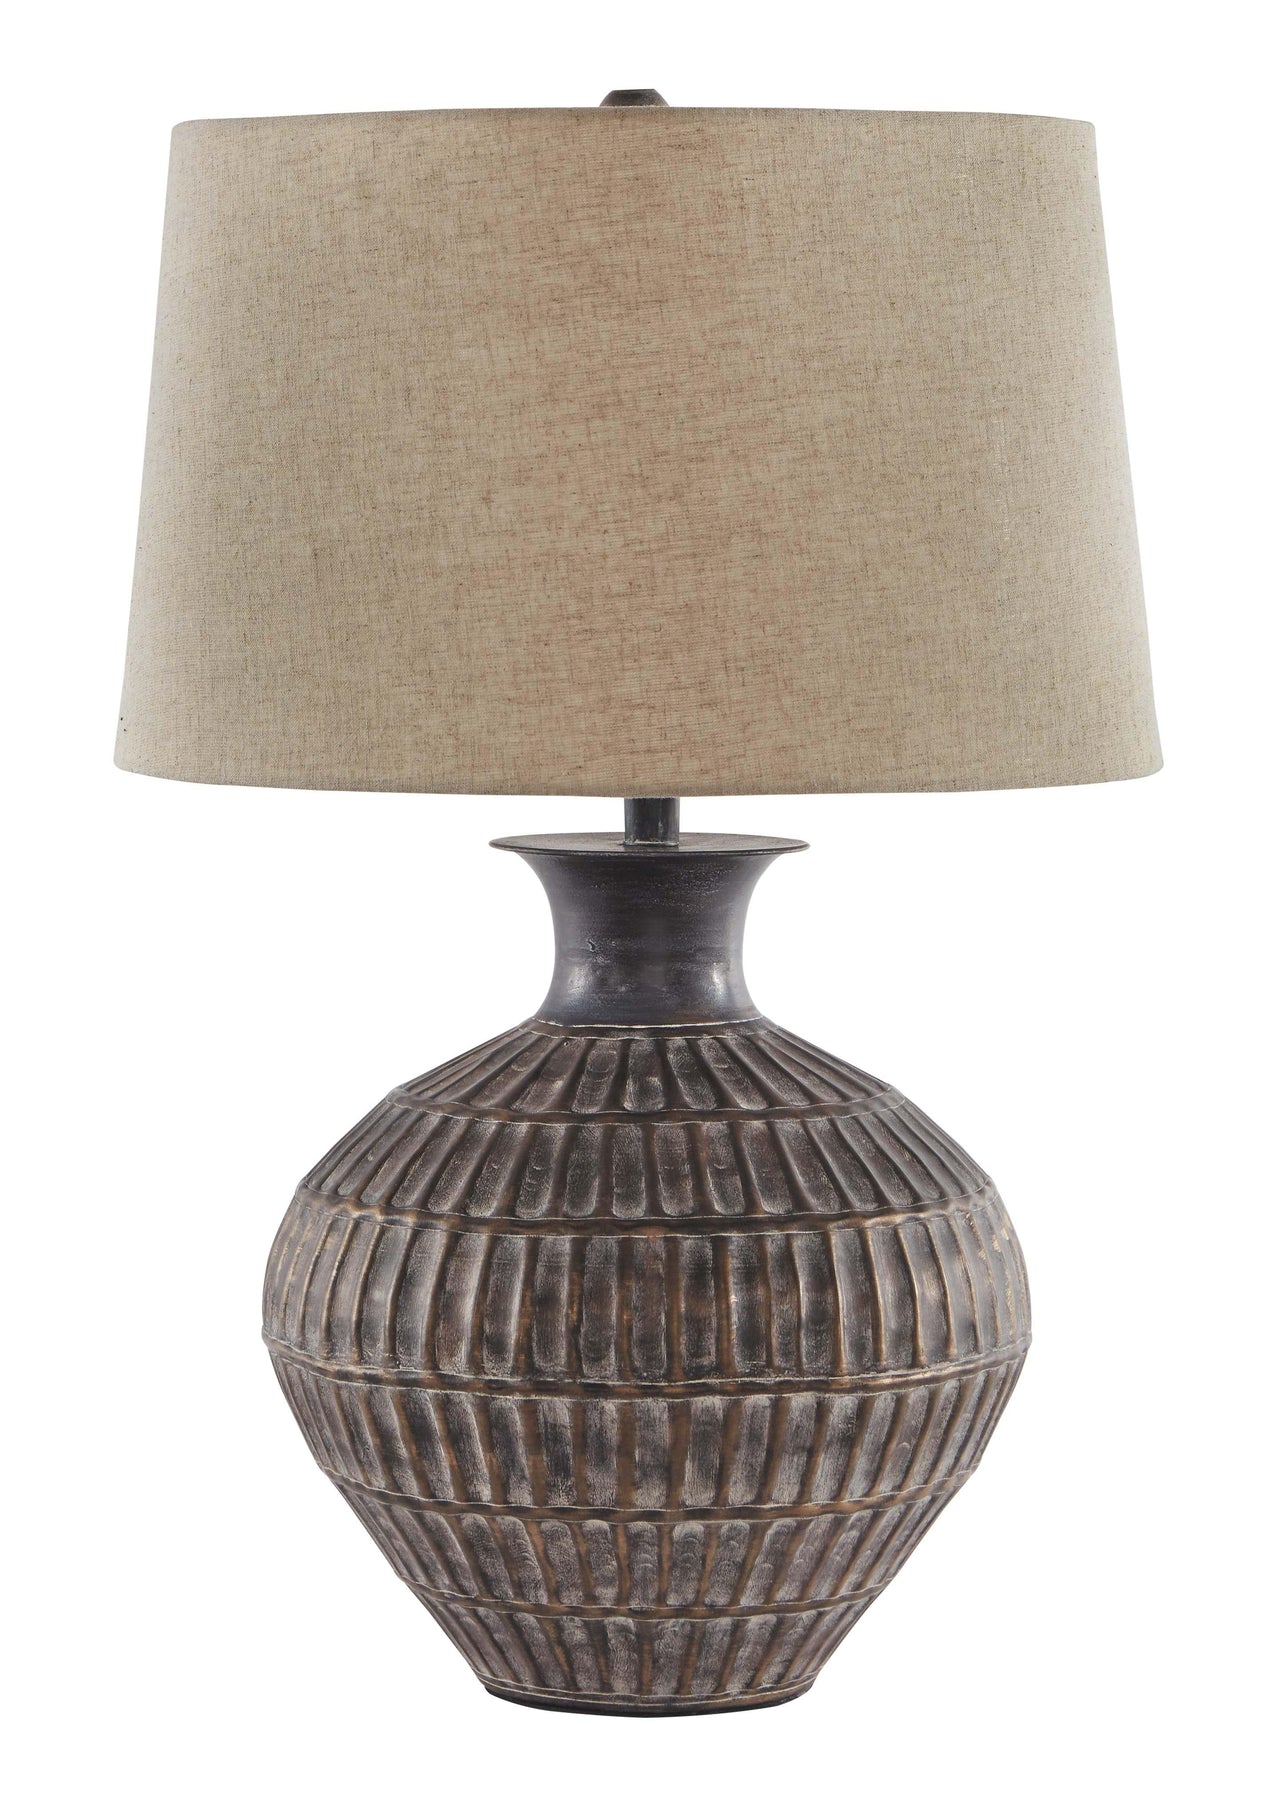 Magan - Antique Bronze Finish - Metal Table Lamp Tony's Home Furnishings Furniture. Beds. Dressers. Sofas.